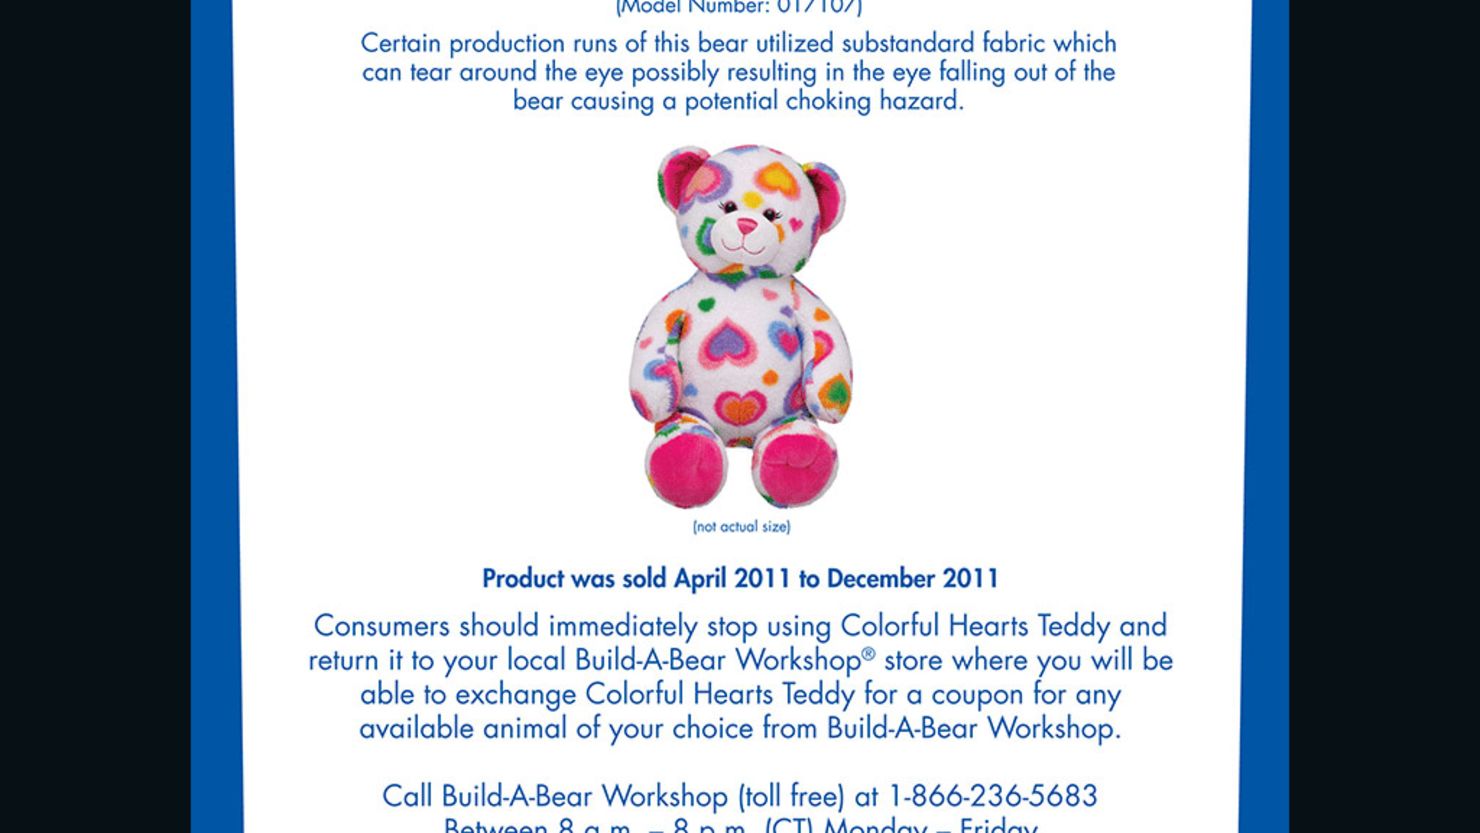 The Build-A-Bear Workshop company is recalling nearly 300,000 Colorful Hearts Teddy Bears sold in the U.S. and Canada.